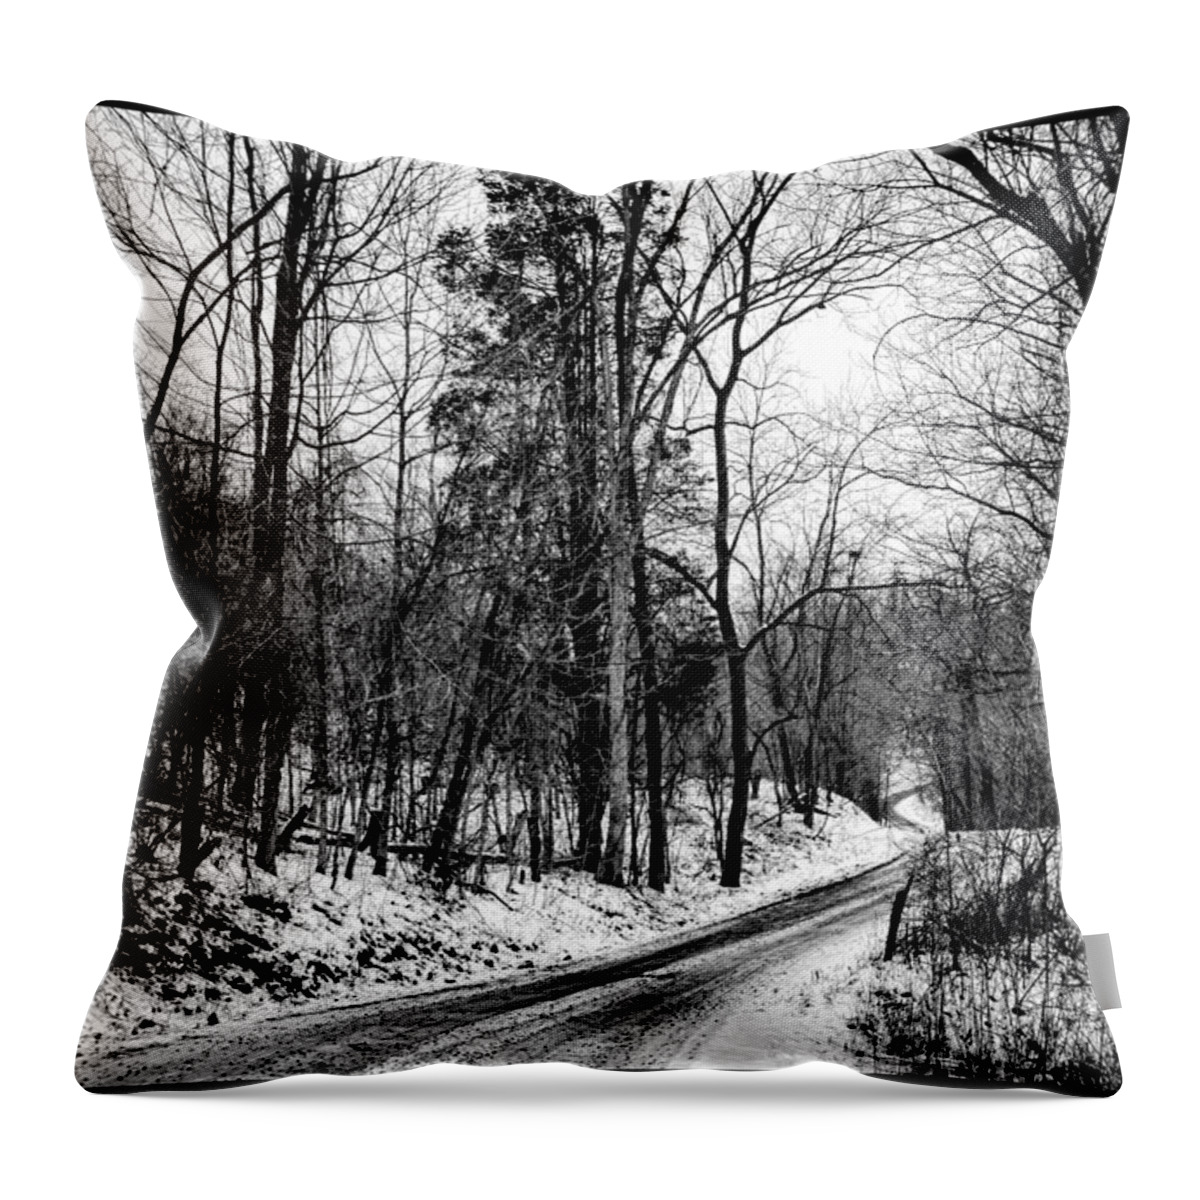 68steelphotos Throw Pillow featuring the photograph The Lonely Road by Scott Bryan